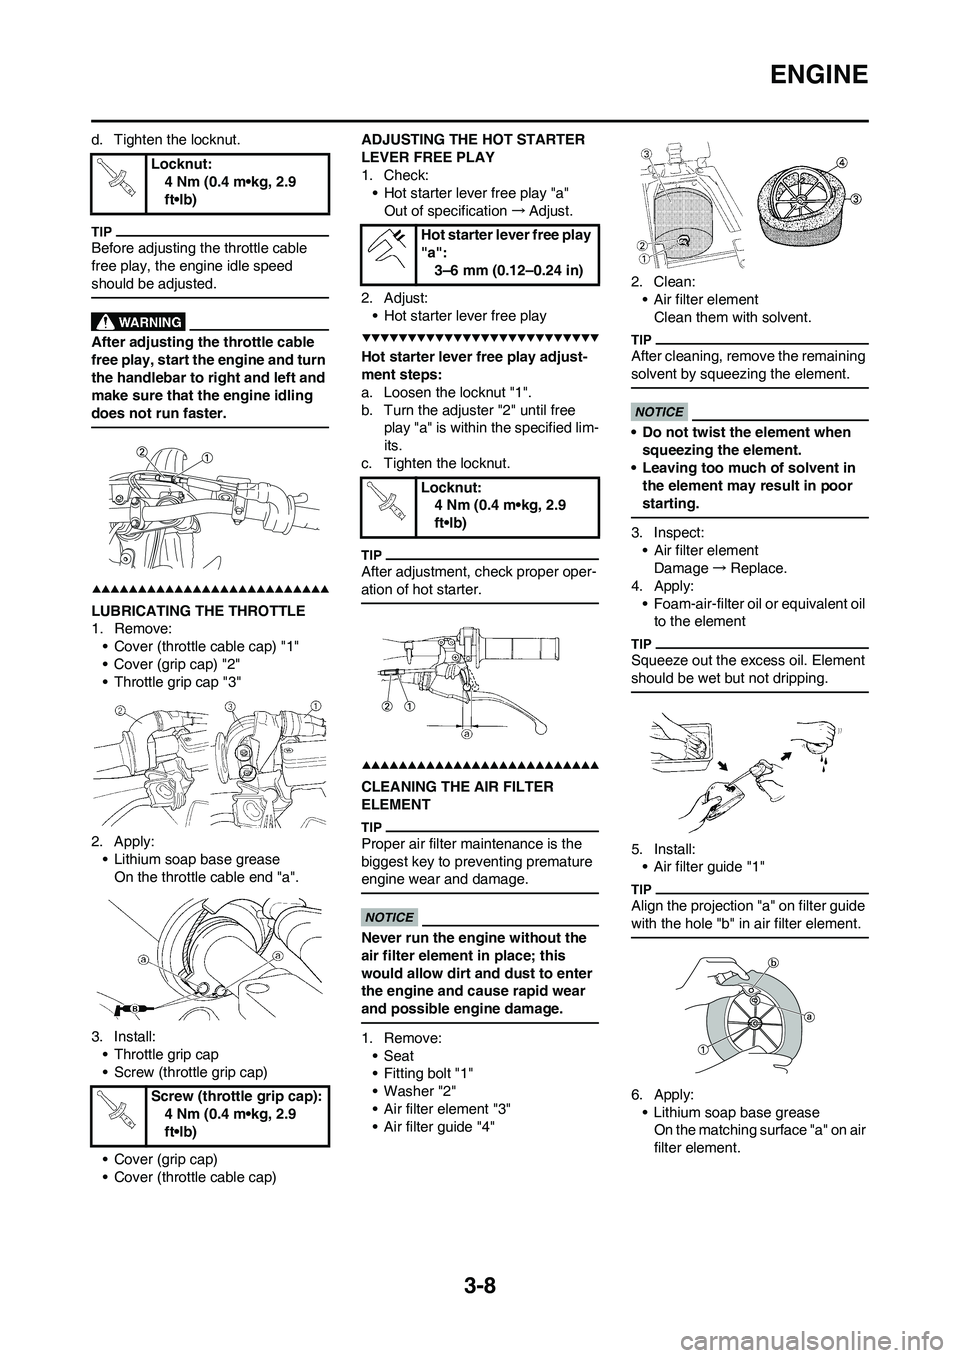 YAMAHA YZ450F 2009  Owners Manual 3-8
ENGINE
d. Tighten the locknut.
Before adjusting the throttle cable 
free play, the engine idle speed 
should be adjusted.
After adjusting the throttle cable 
free play, start the engine and turn 
